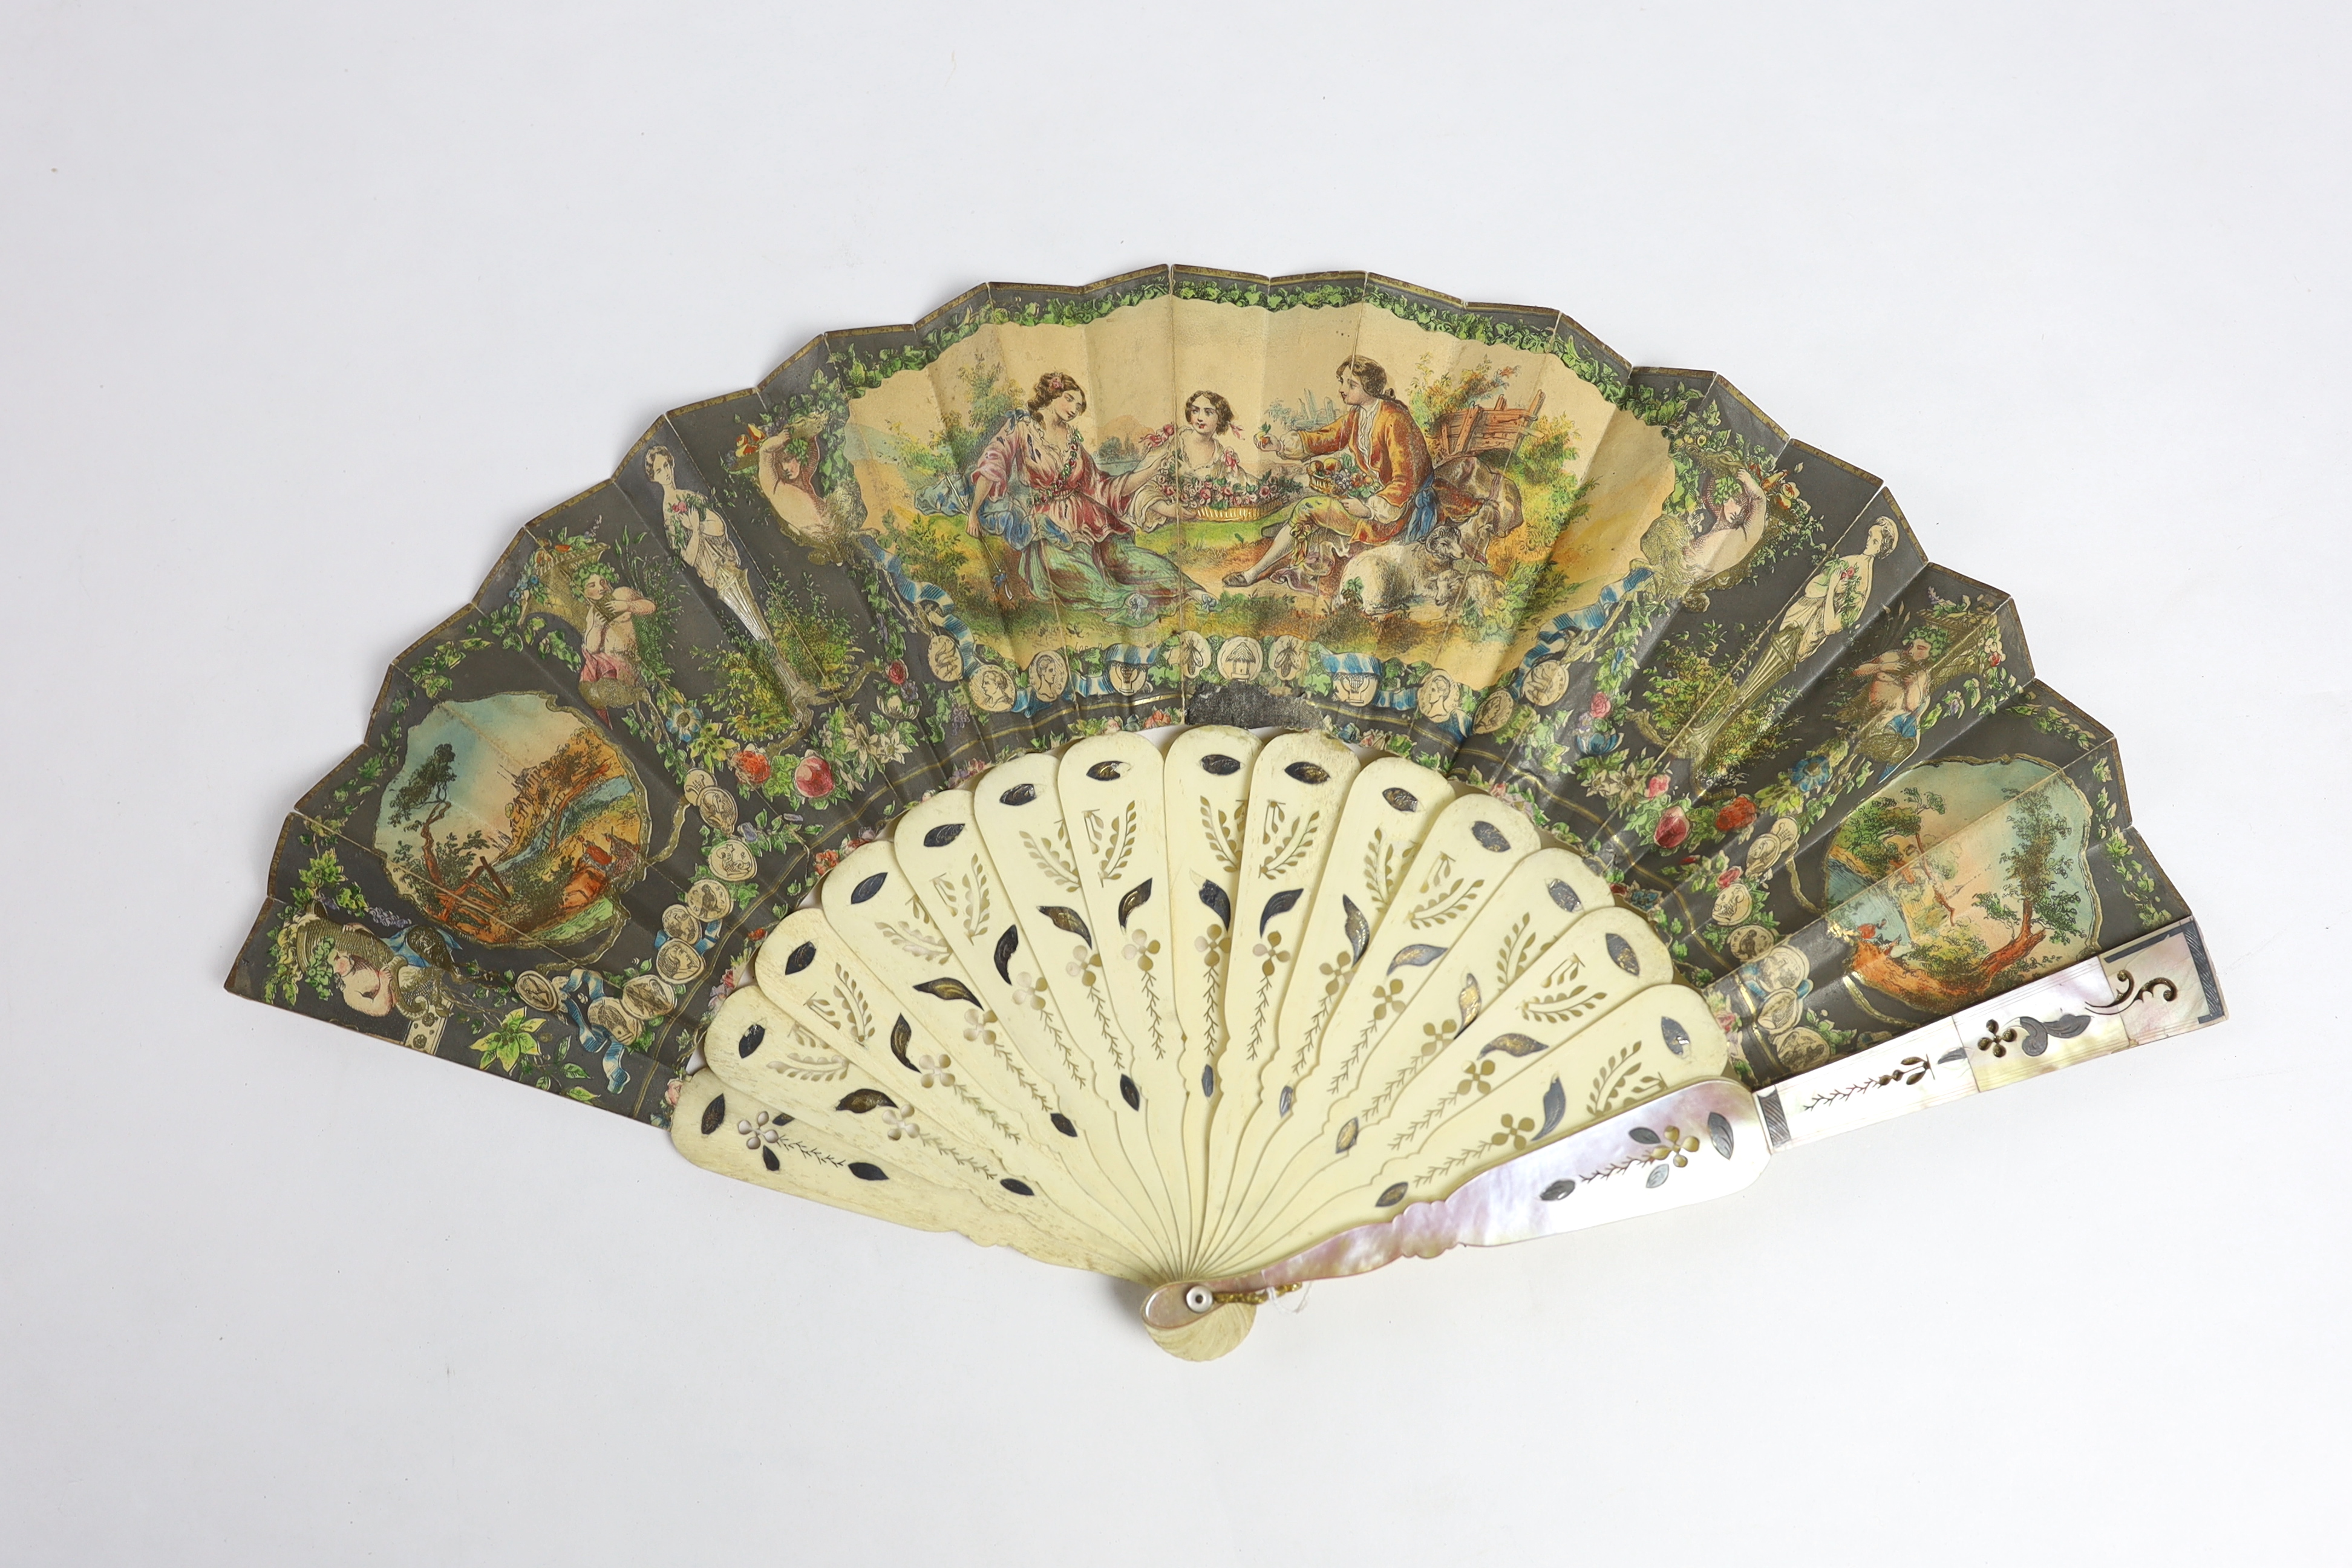 A 19th century mother of pearl and carved bone fan with ornate printed paper leaf, together with a similar Spanish fan of dancers, with mother of pearl guards, signed.